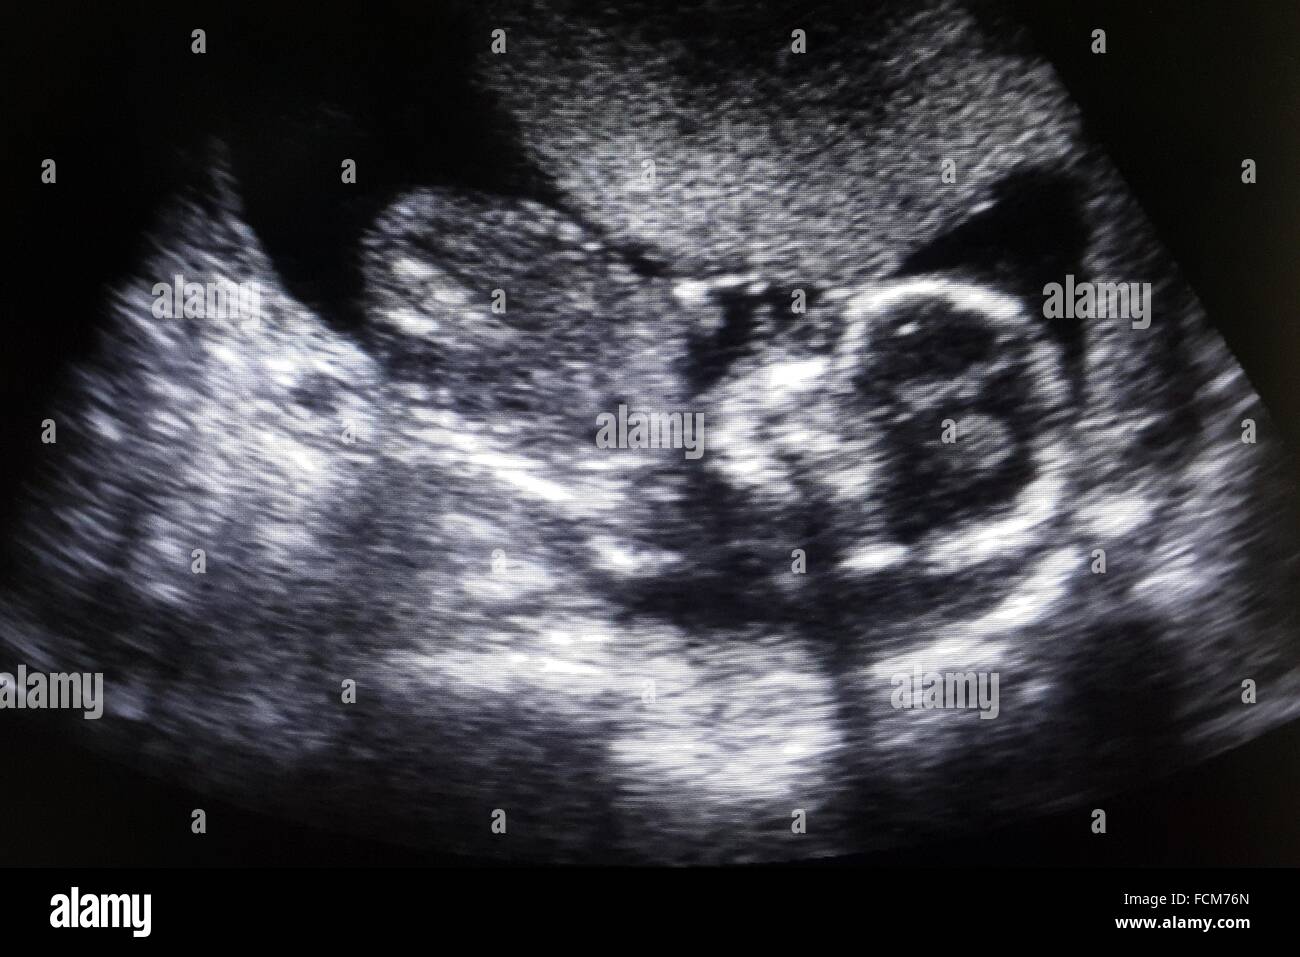 Obstetric ultrasound obtein a Picture of a foetus using ultra-sound machine. Stock Photo